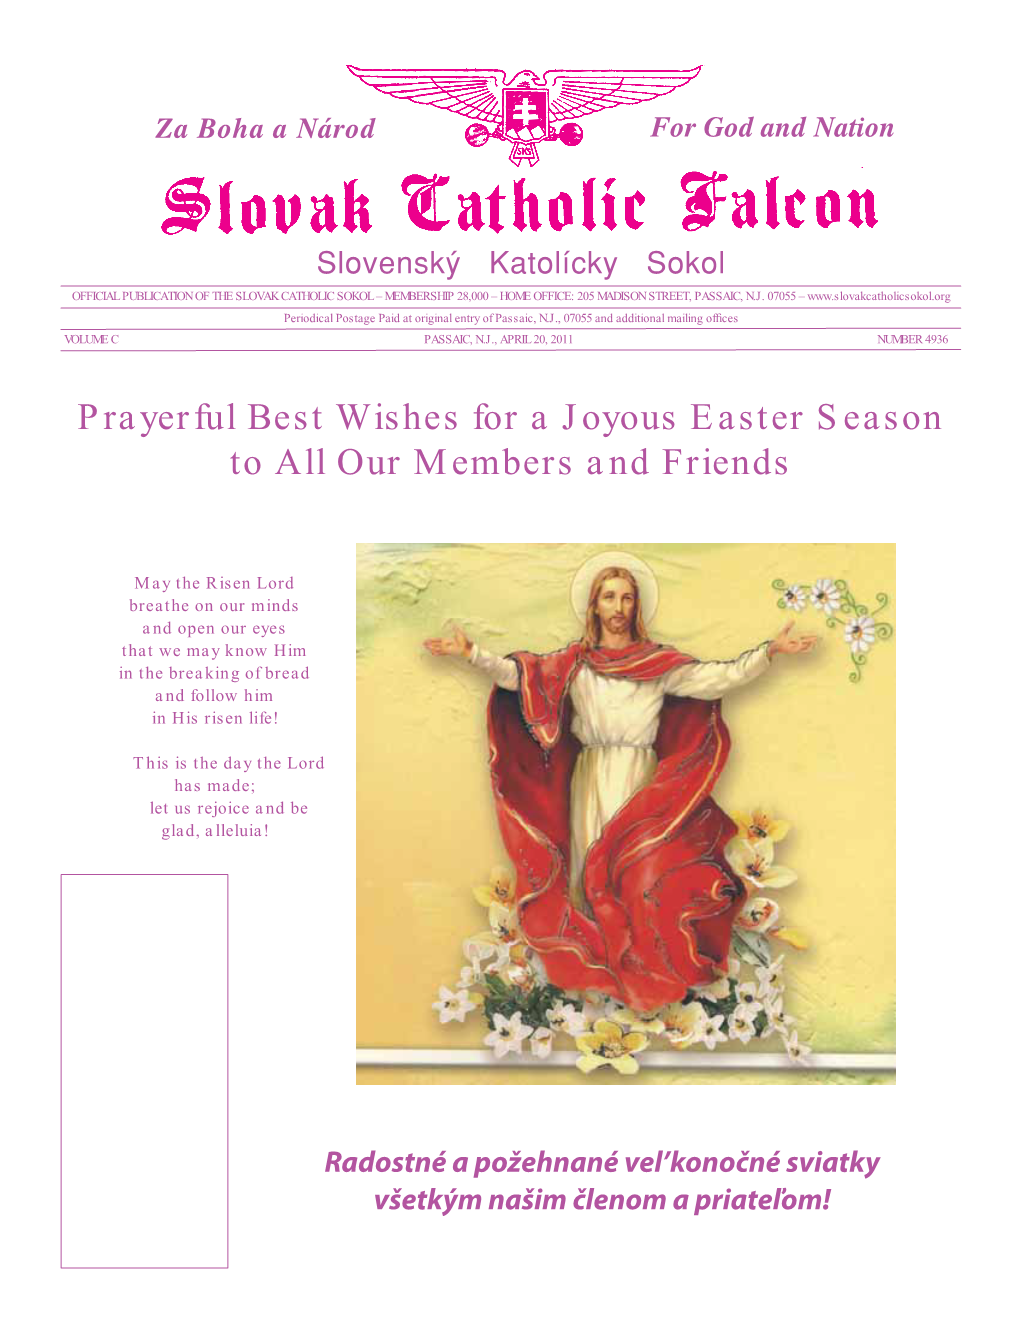 Prayerful Best Wishes for a Joyous Easter Season to All Our Members and Friends